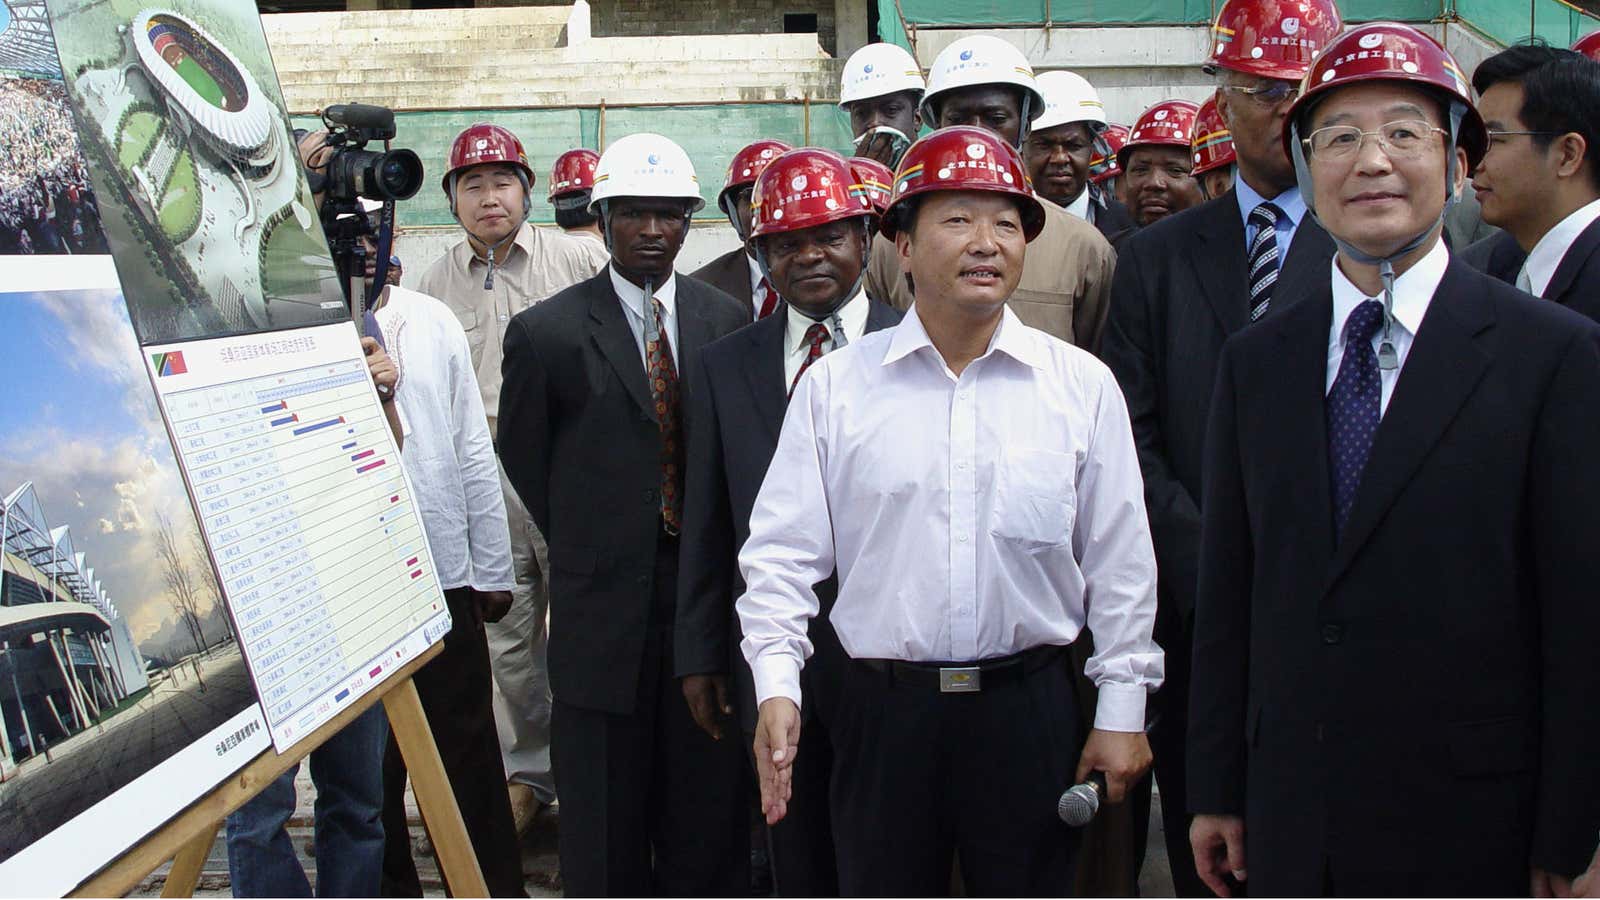 Chinese Premier Wen Jiabao, right, talk to Chinese construction workers who are supervising the building of a sports stadium in Dar Es Salaam, Tanzania Friday,…